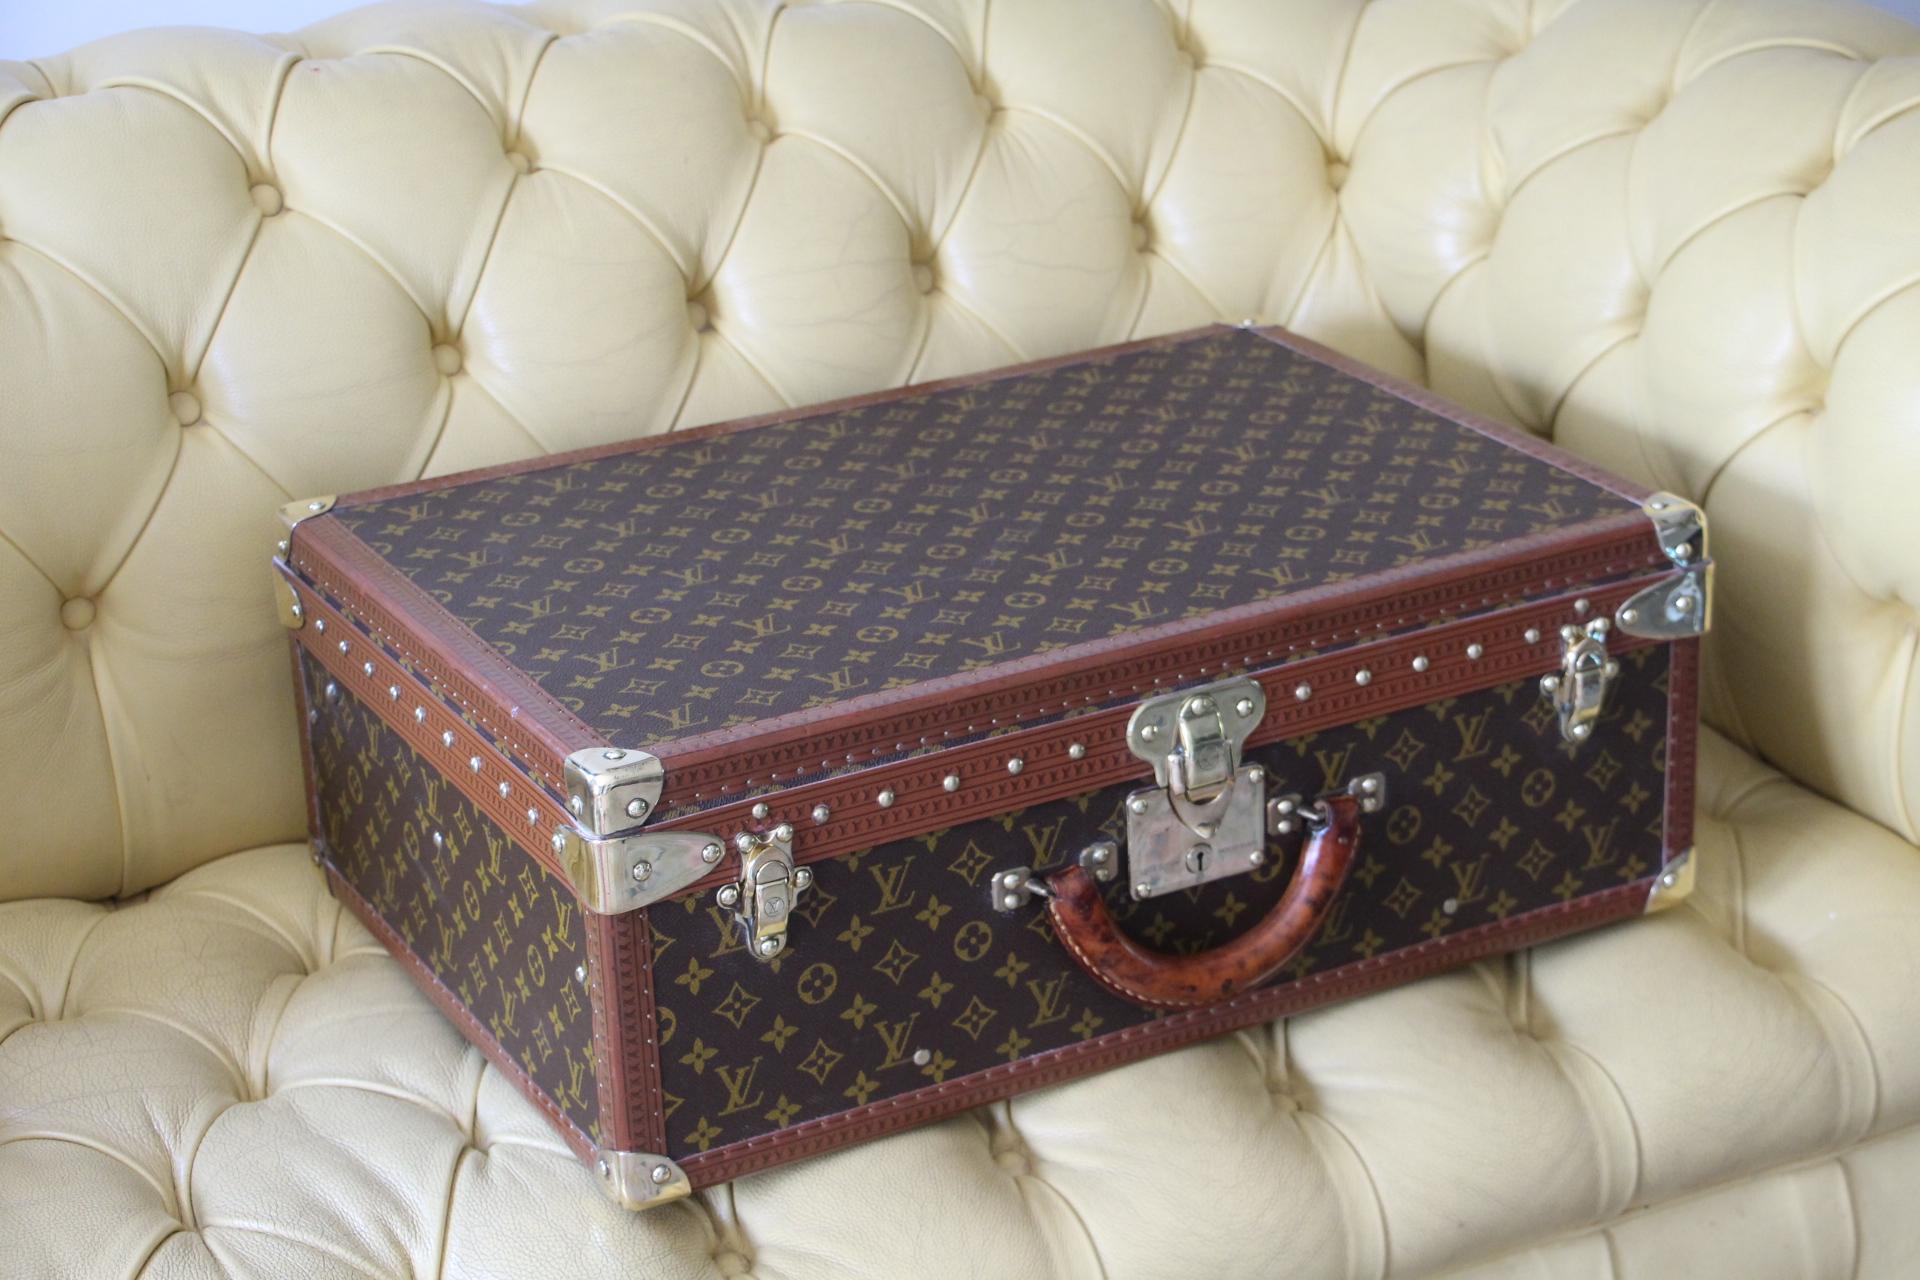 Magnificent Louis Vuitton Alzer monogramm suitcase.
All Louis Vuitton stamped solid brass fittings: locks, clasps and studs.
Superb interior, all original with its removable tray, its Louis Vuitton label and its serial number. There is a couple of